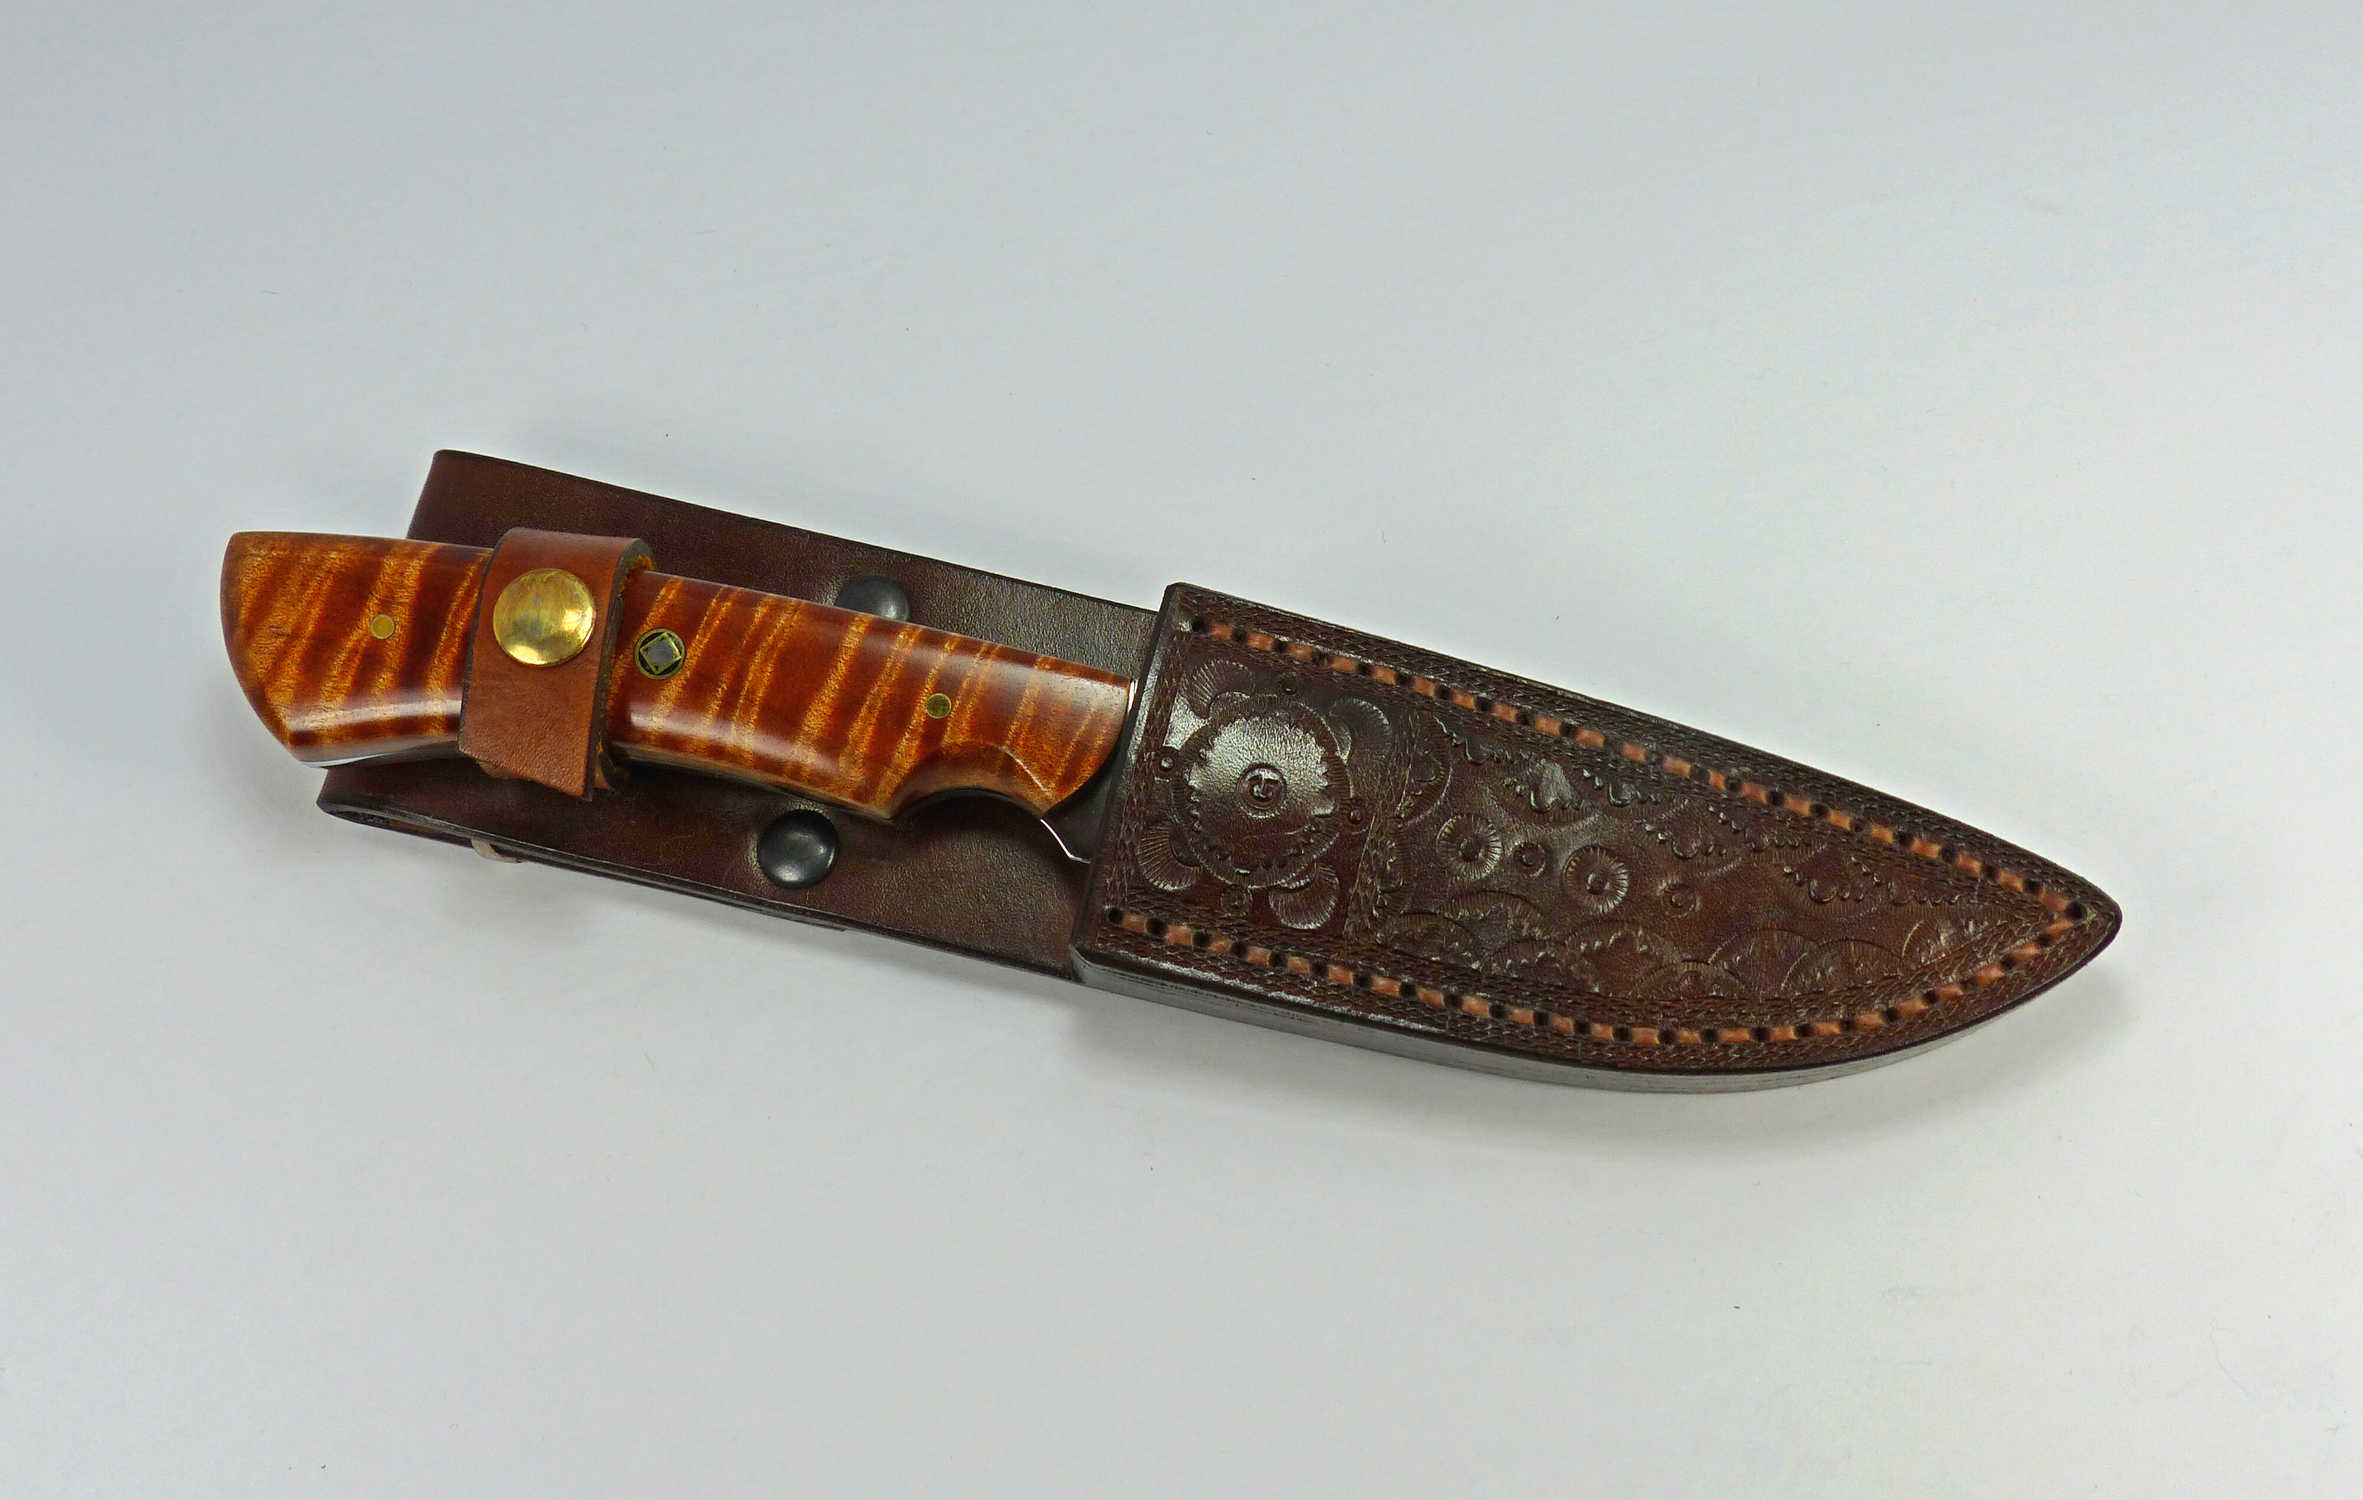 Tiger stripe brown maple wood knife inside handcrafted fitted leather sheath